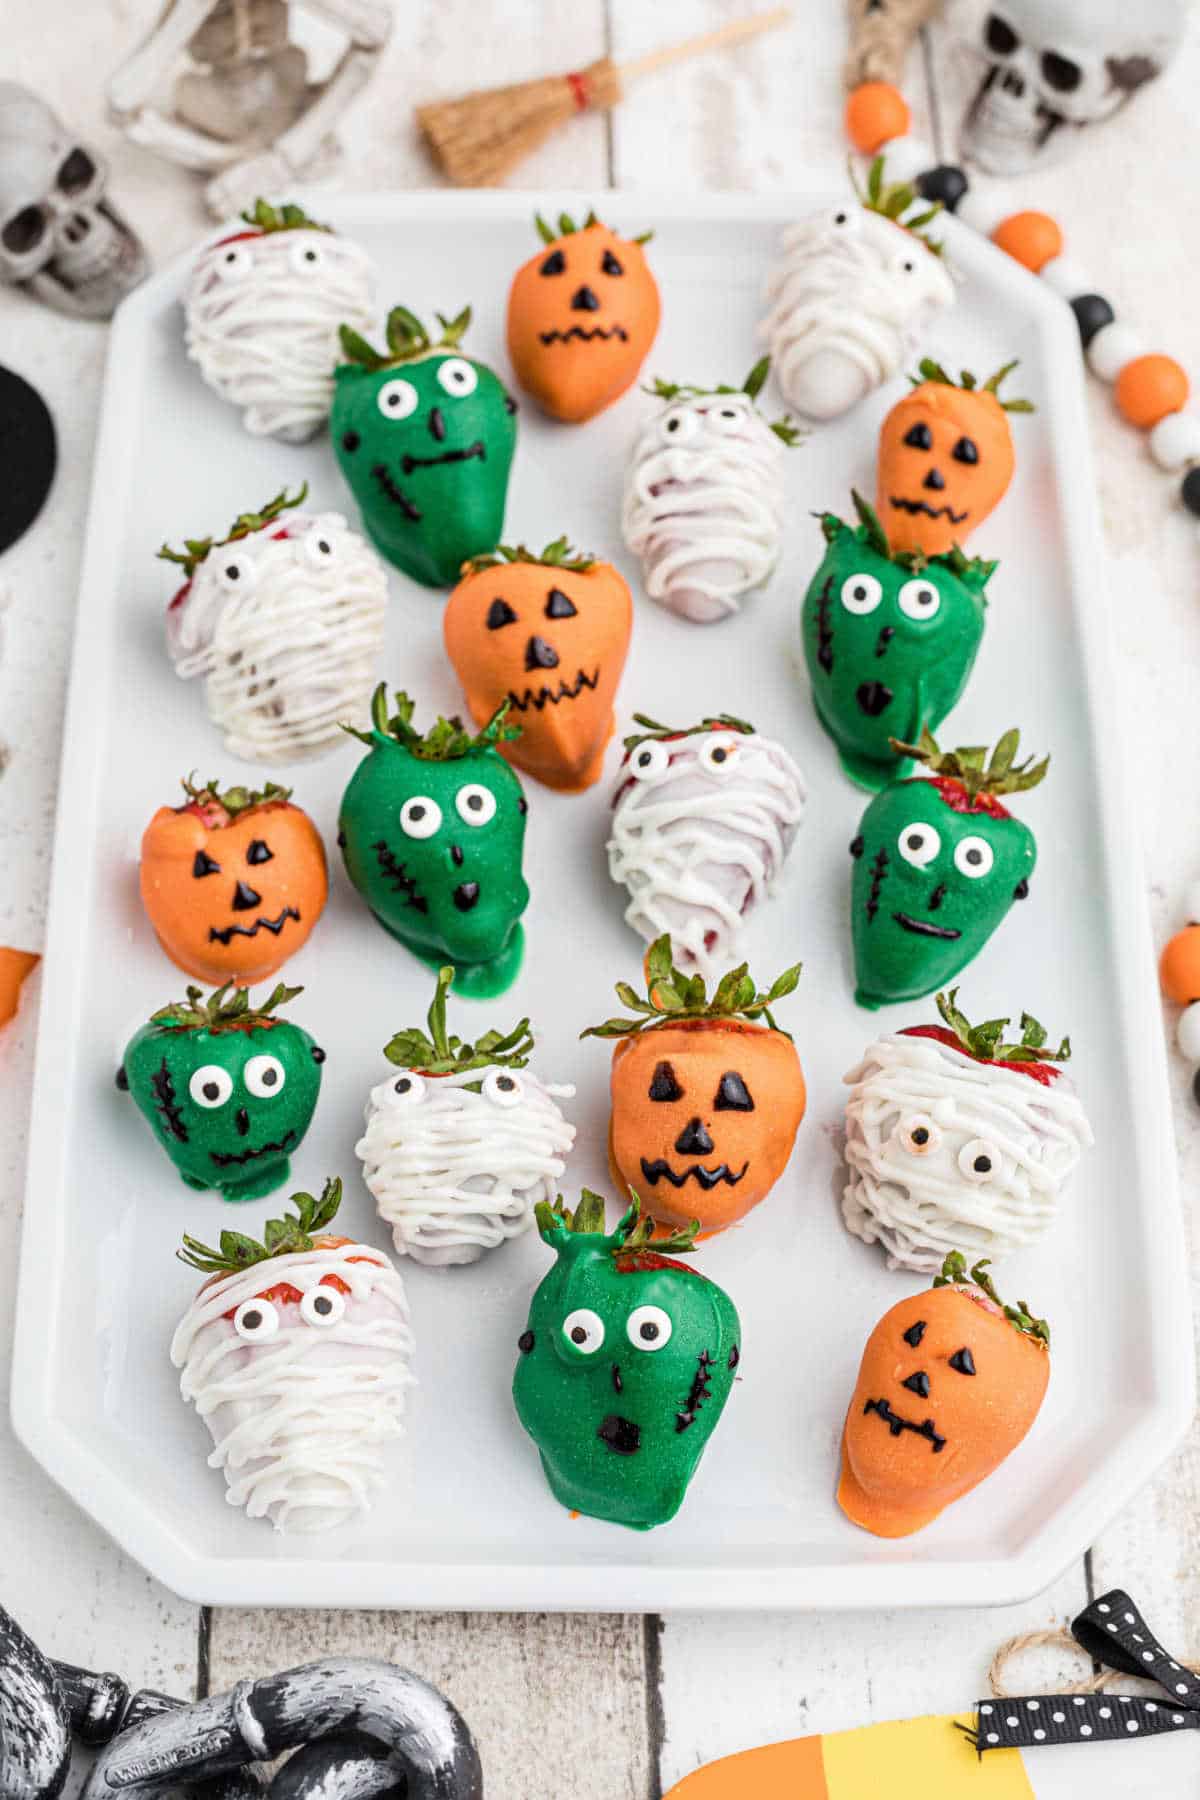 A plate of halloween themed chocolate covered strawberries.